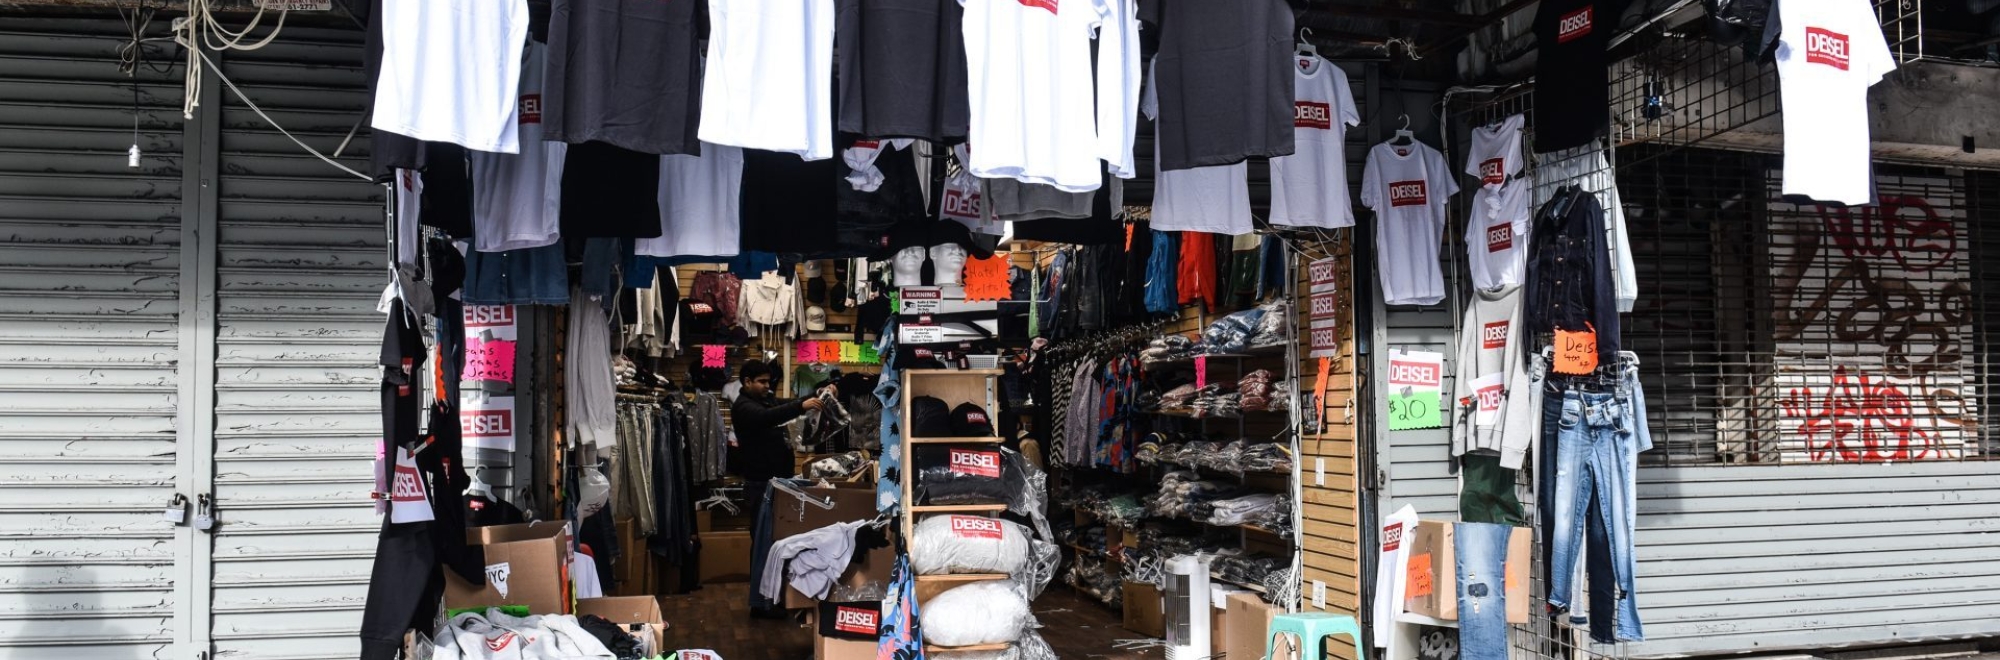 How Deisel opened a pop-up fake shop to sell “counterfeit” clothing